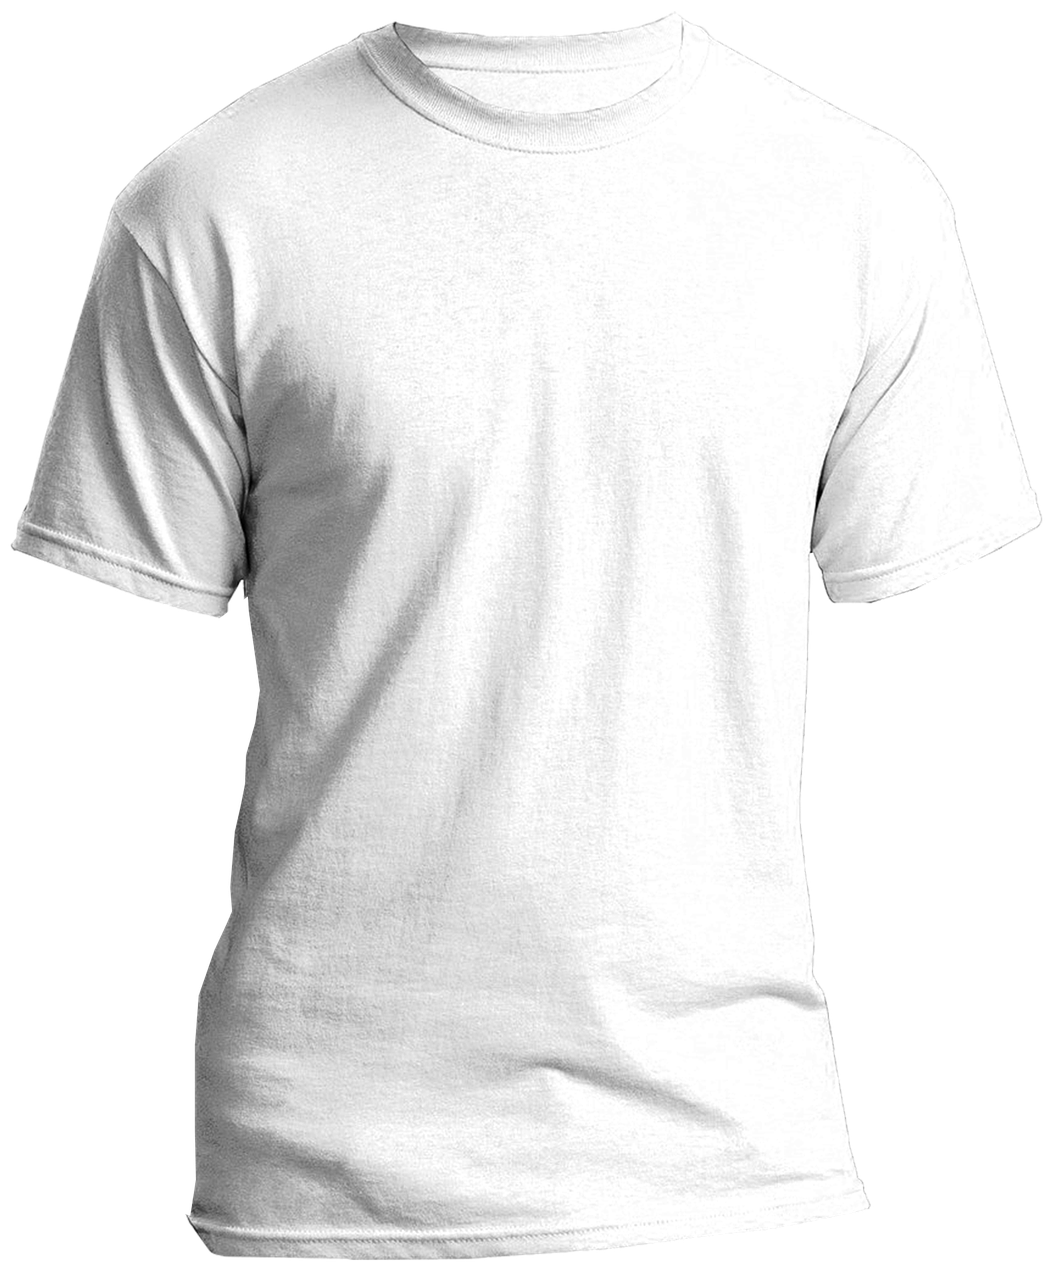 download-free-photo-of-blank-t-shirts-white-t-shirt-template-template